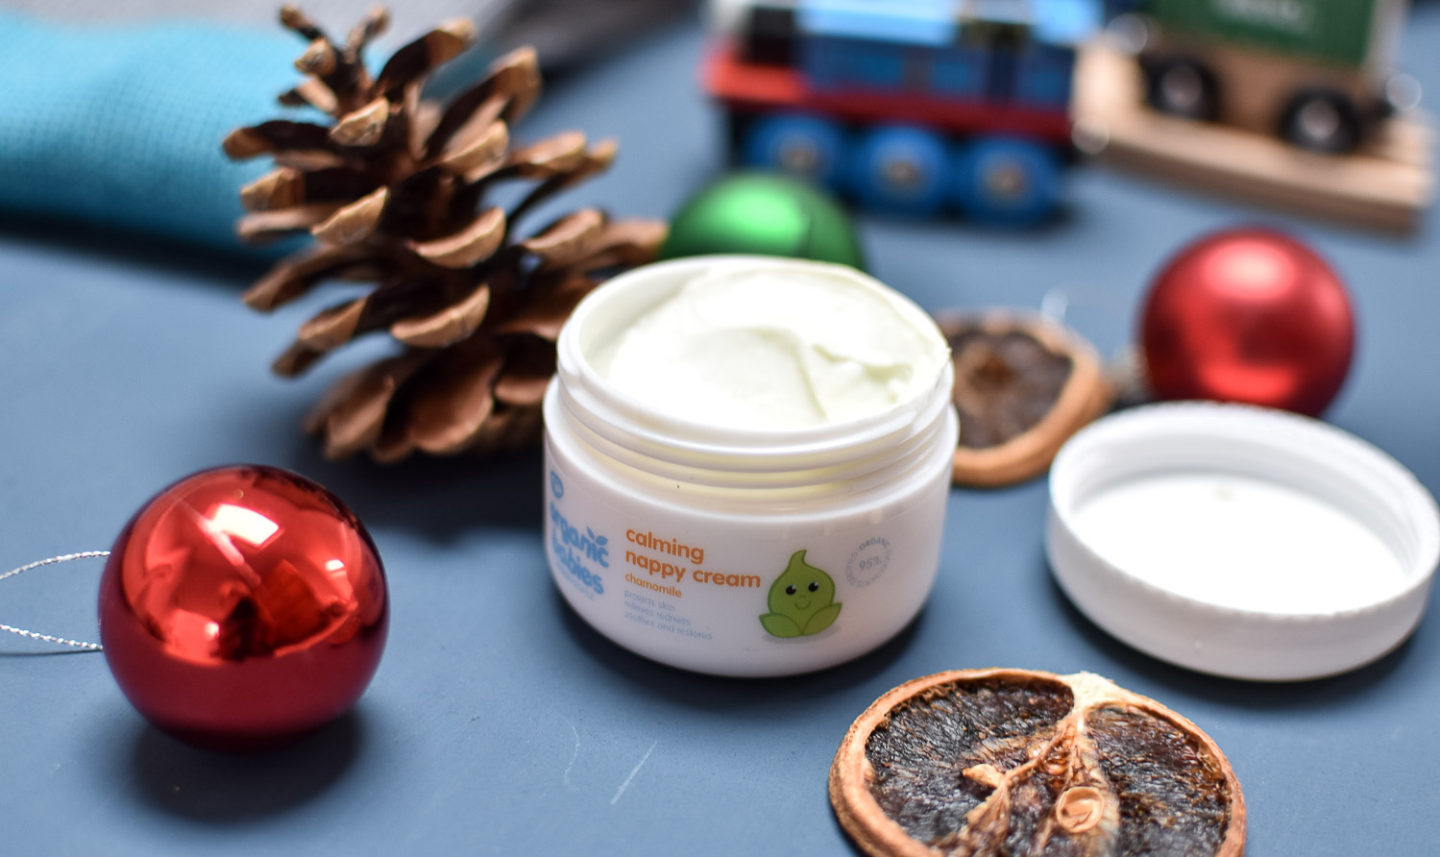 Green People's organic nappy cream, Ethical Christmas Gifts for Kids